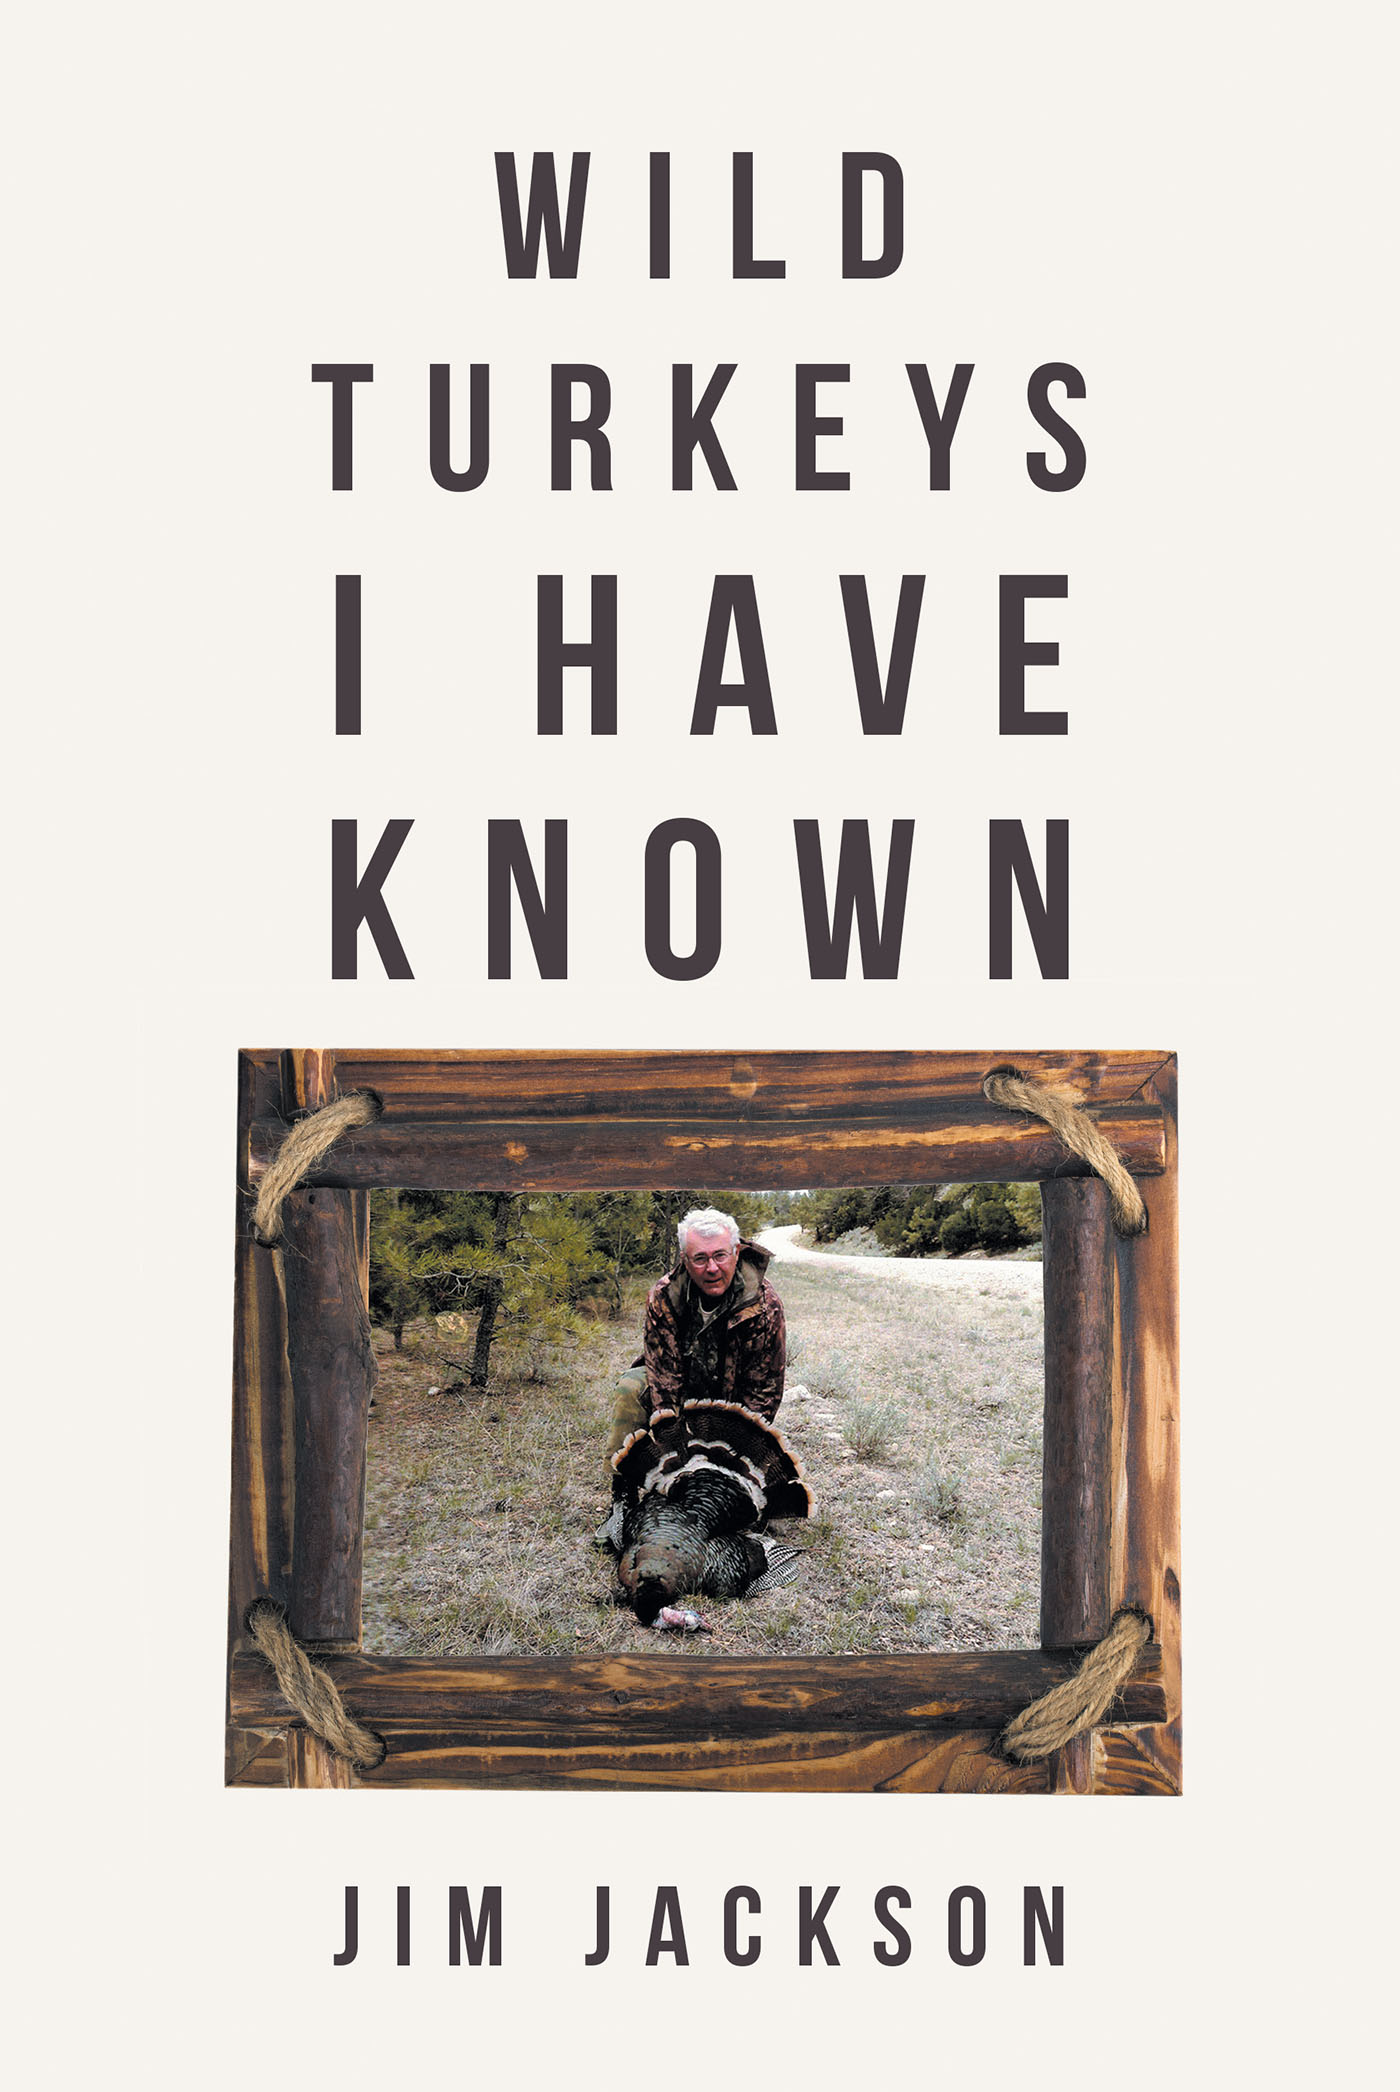 Jim Jackson’s Newly Released "Wild Turkeys I Have Known" is an Enjoyable Collection of Tales from the Field and Beyond